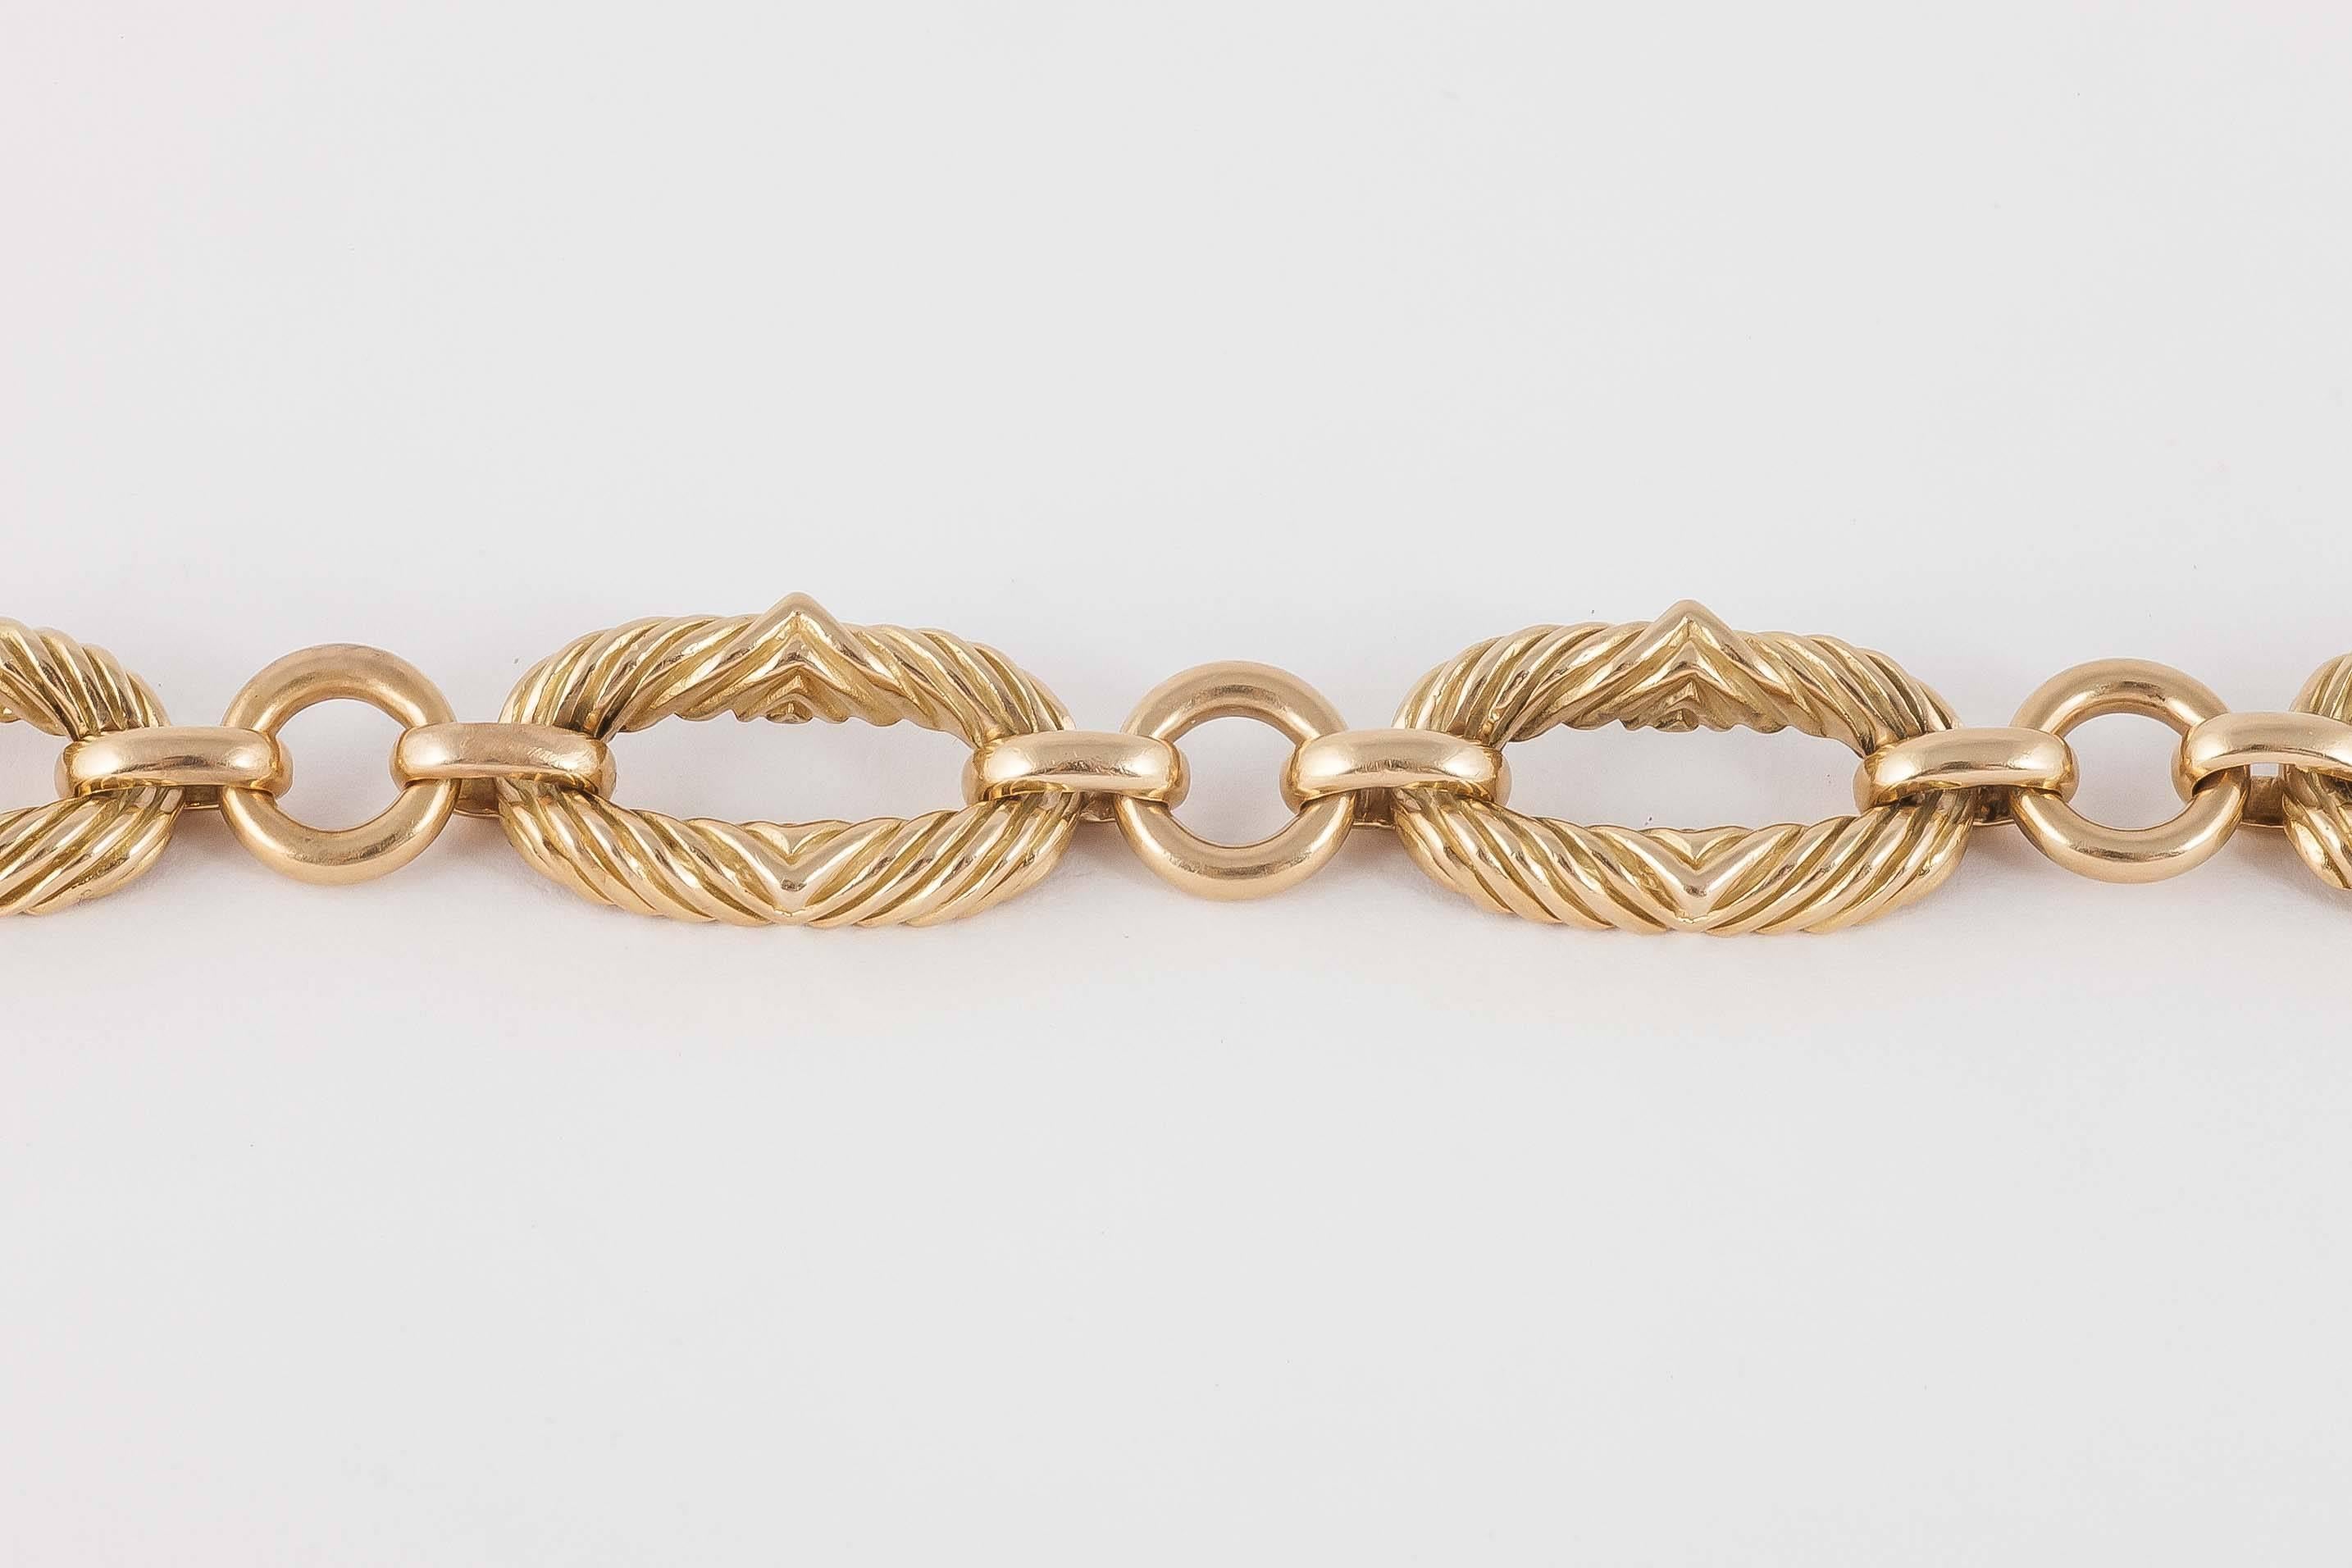 1960s Chaumet Heavy Gold Link Bracelet In Excellent Condition For Sale In London, GB